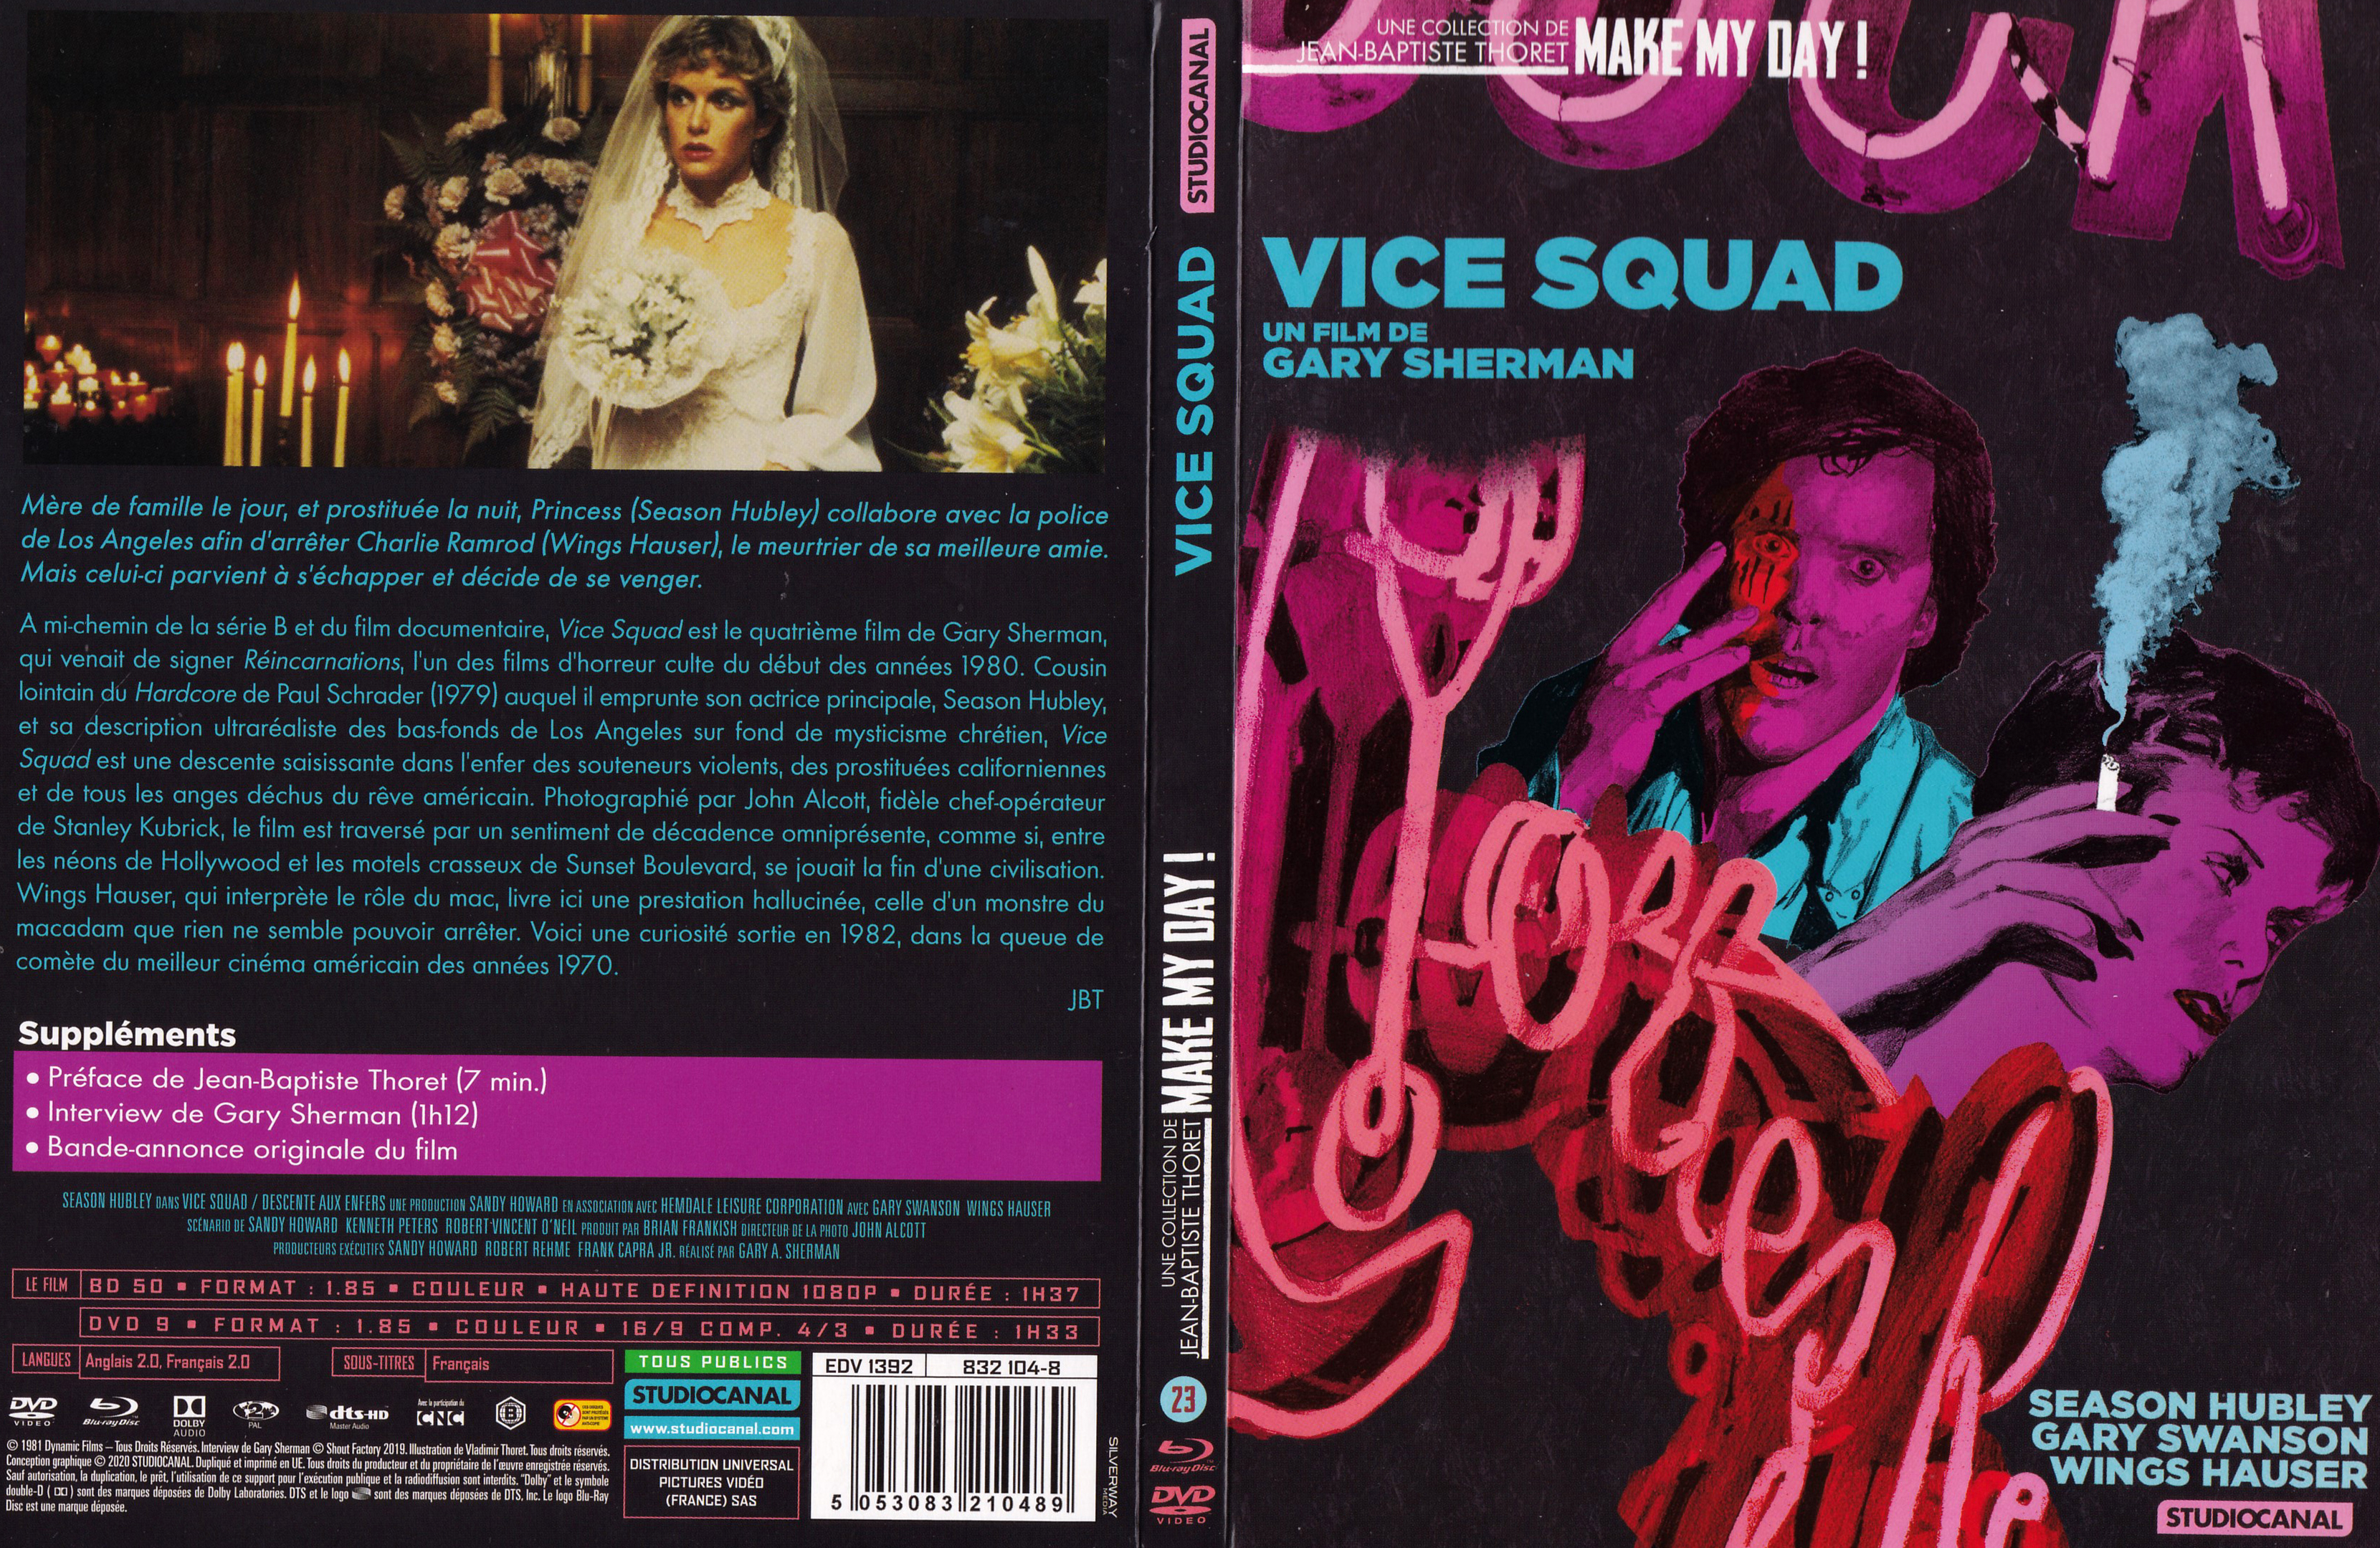 Jaquette DVD Vice squad (BLU-RAY)